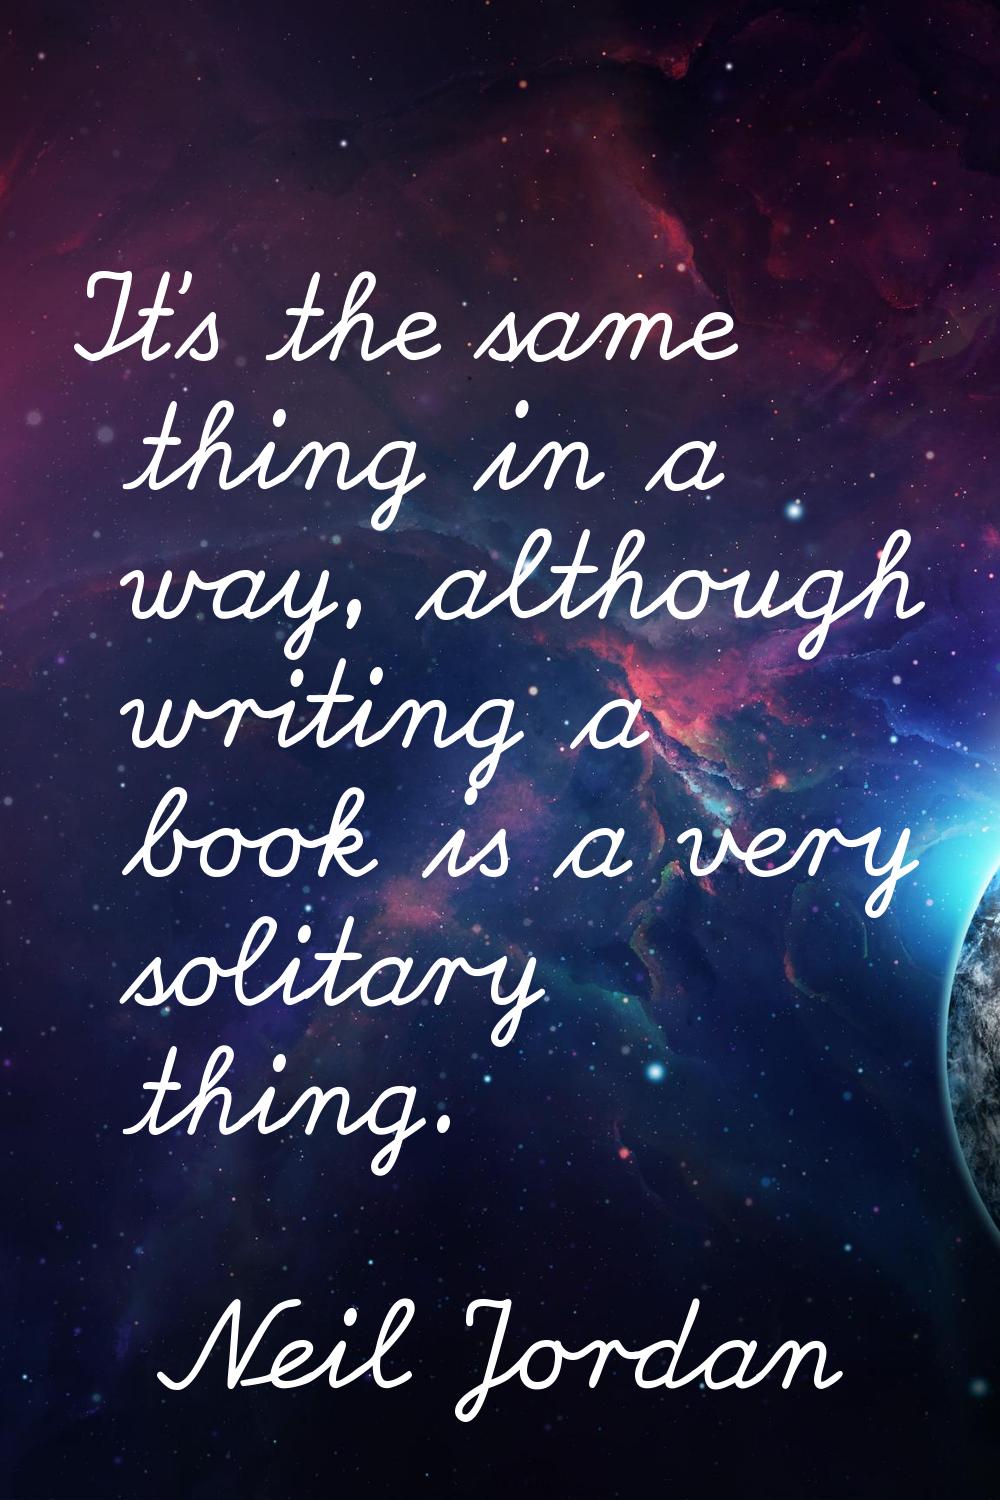 It's the same thing in a way, although writing a book is a very solitary thing.